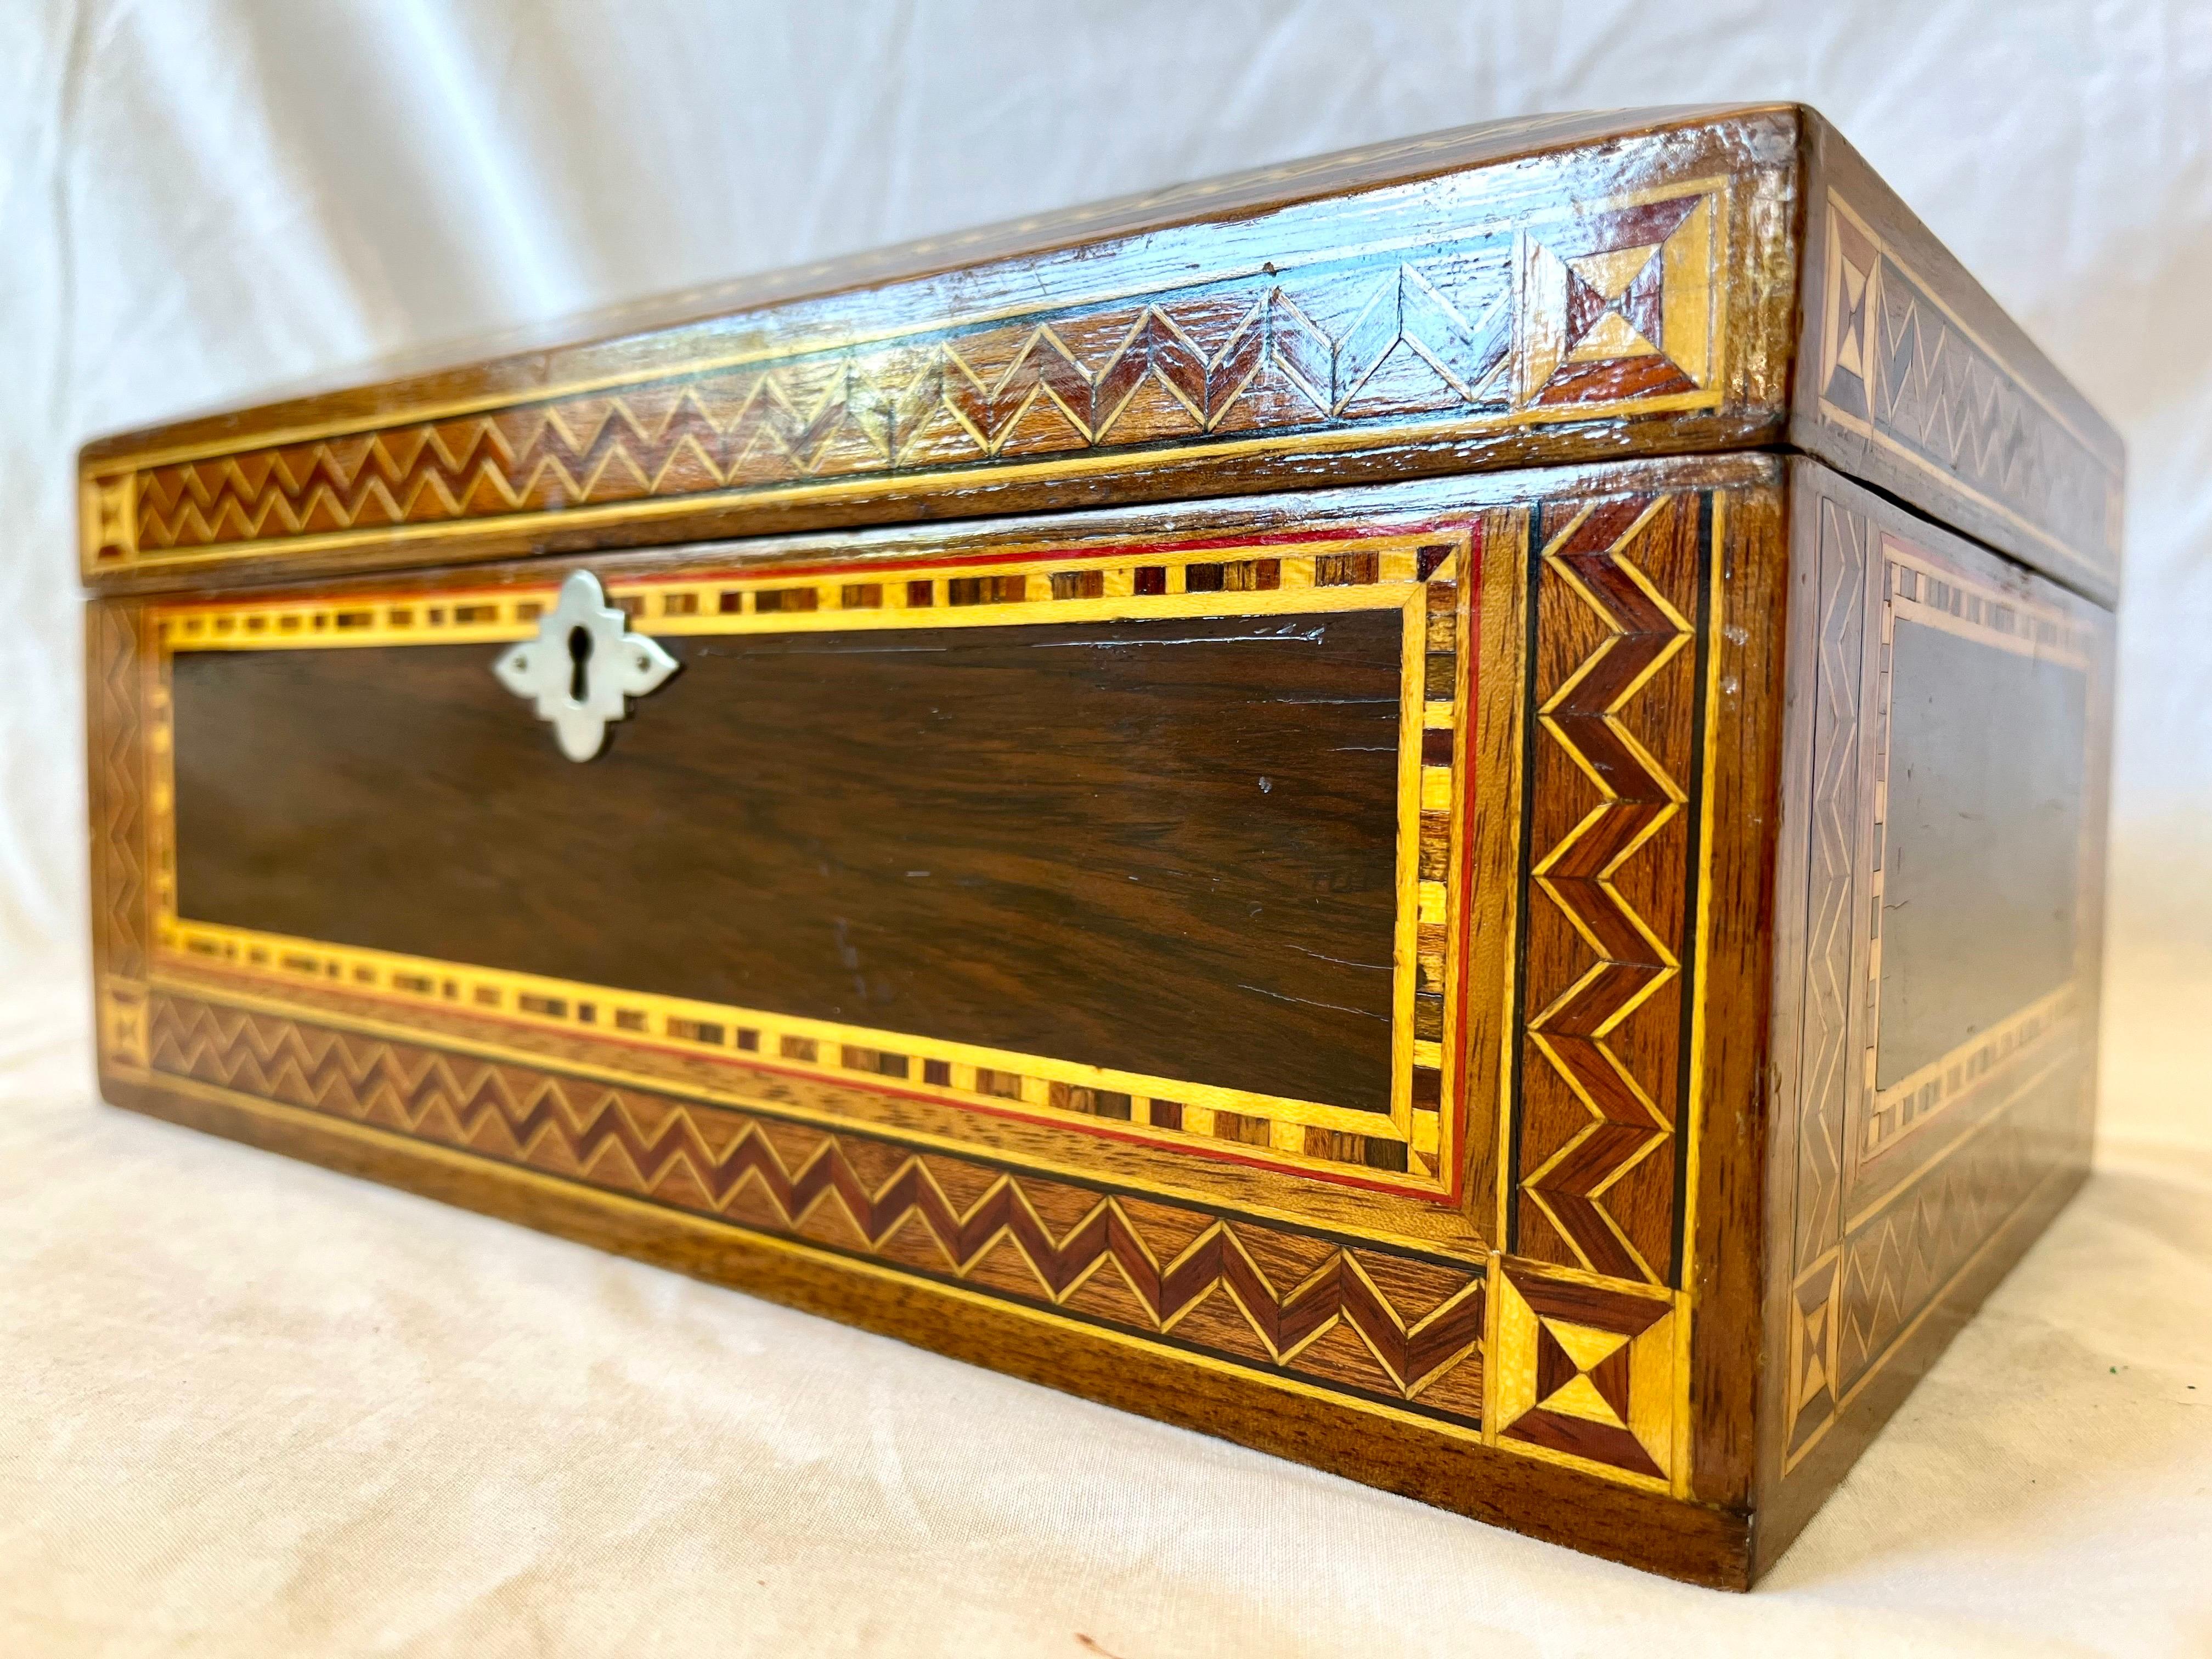 North American Vintage Marquetry Wood Inlaid Jewelry Casket Box with Mirror and Velvet Interior